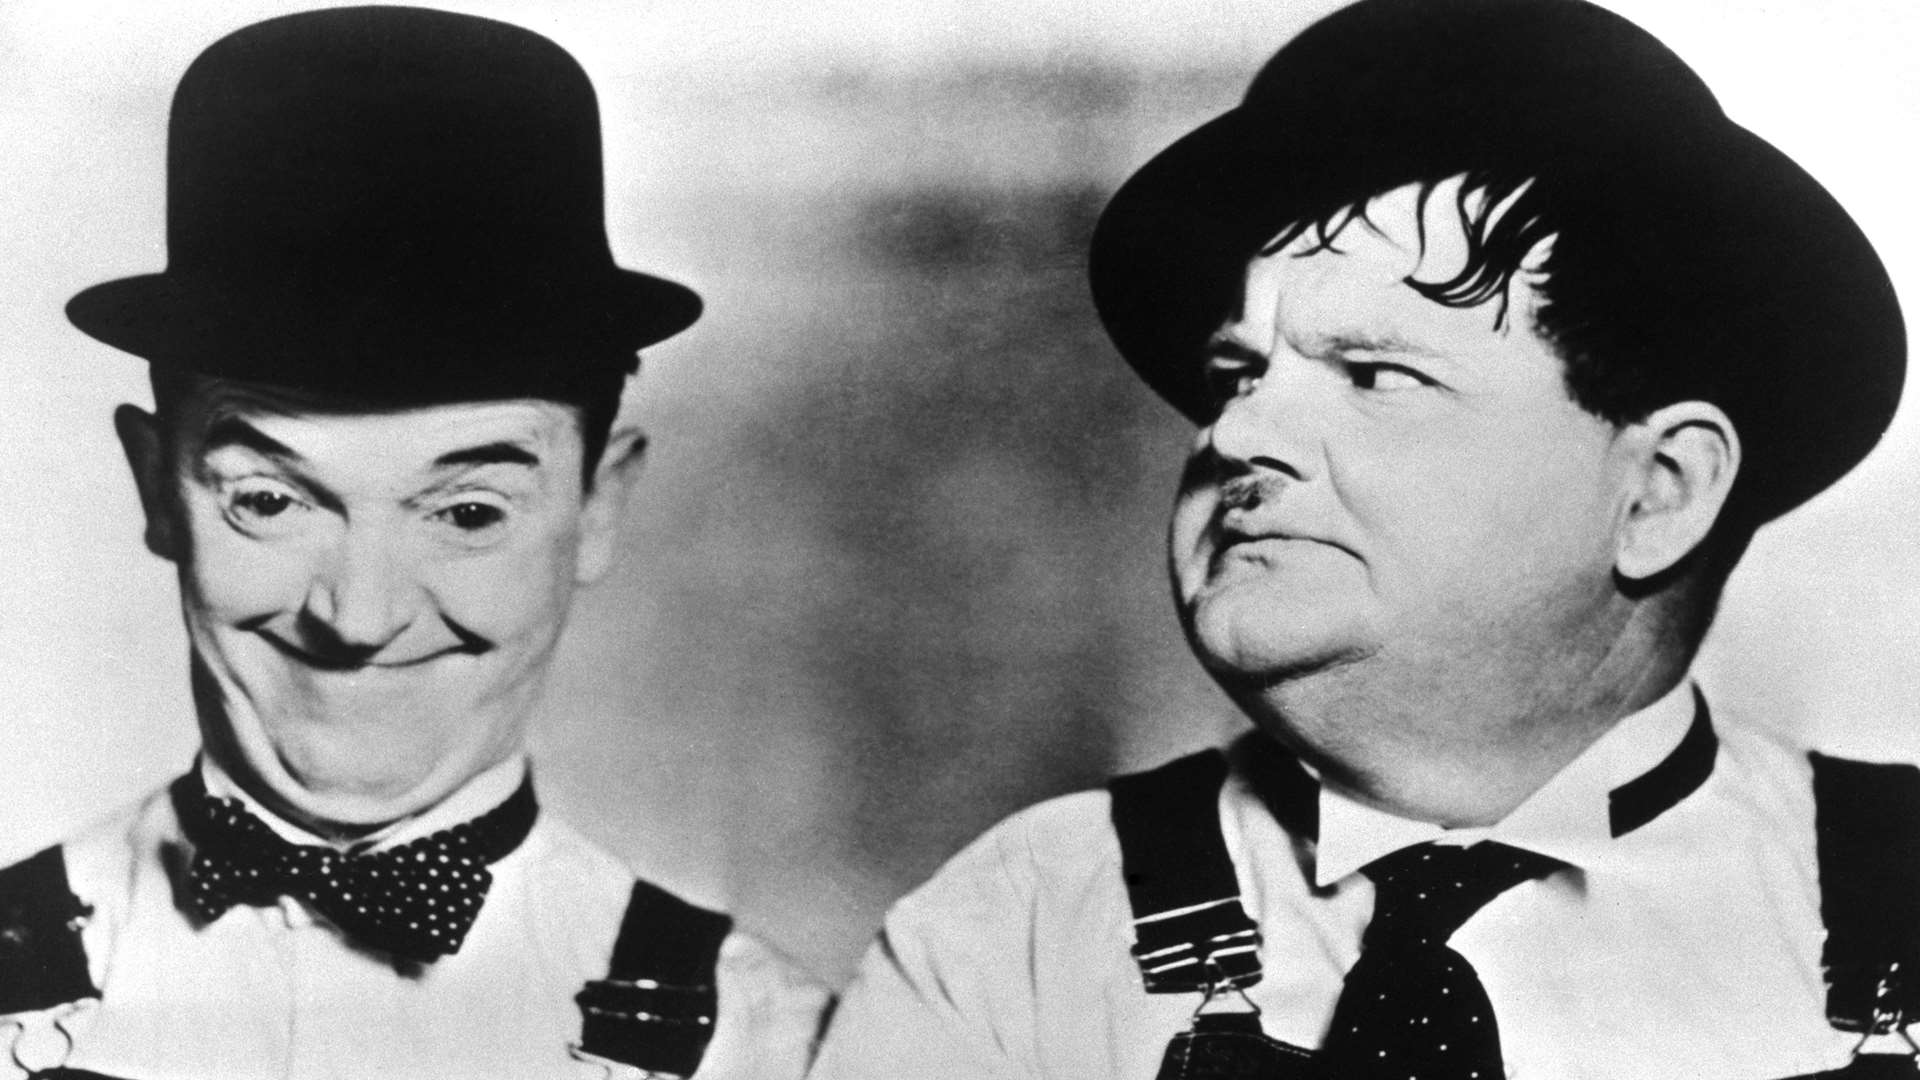 Laurel and Hardy on KMTV